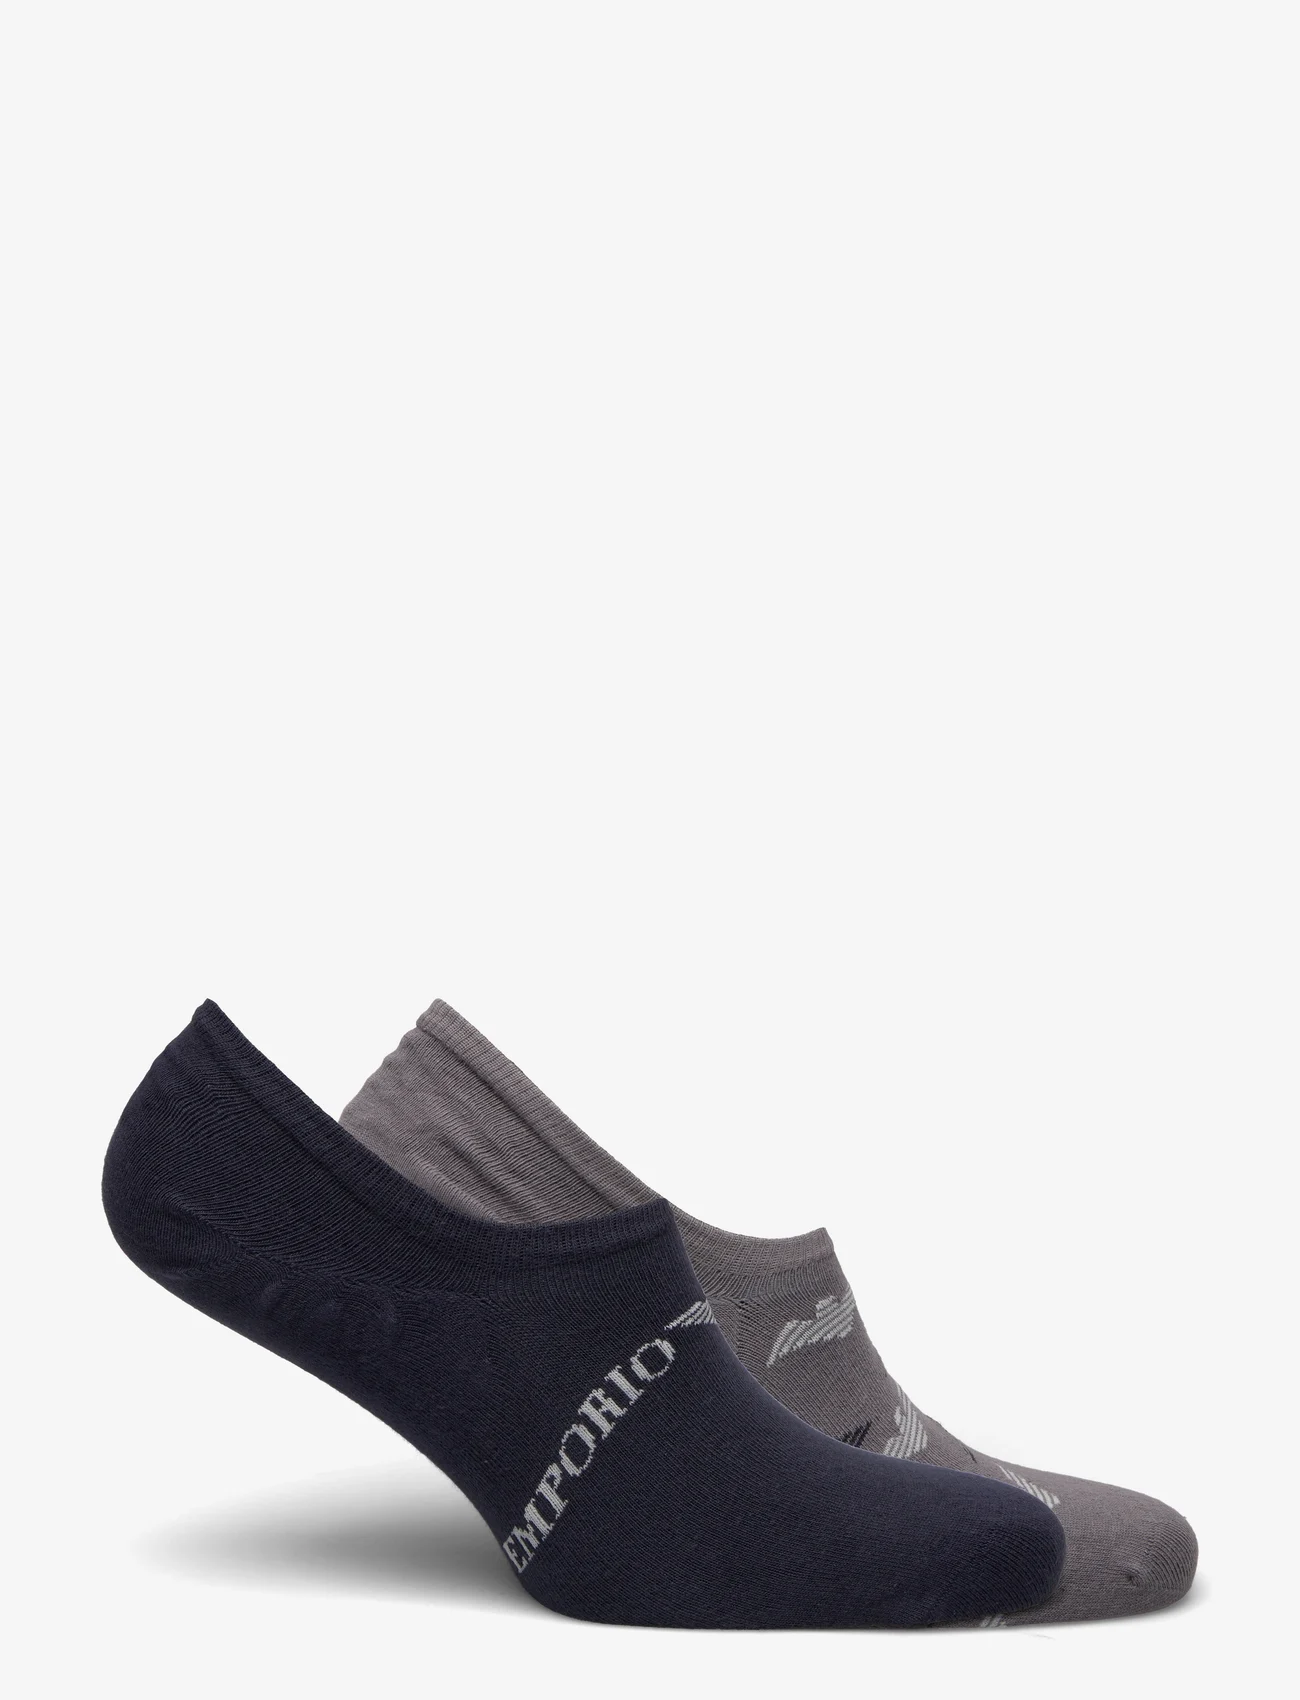 Emporio Armani - 2PACK SOCKS - lowest prices - 52636-marin/antrac/eag.mar - 1